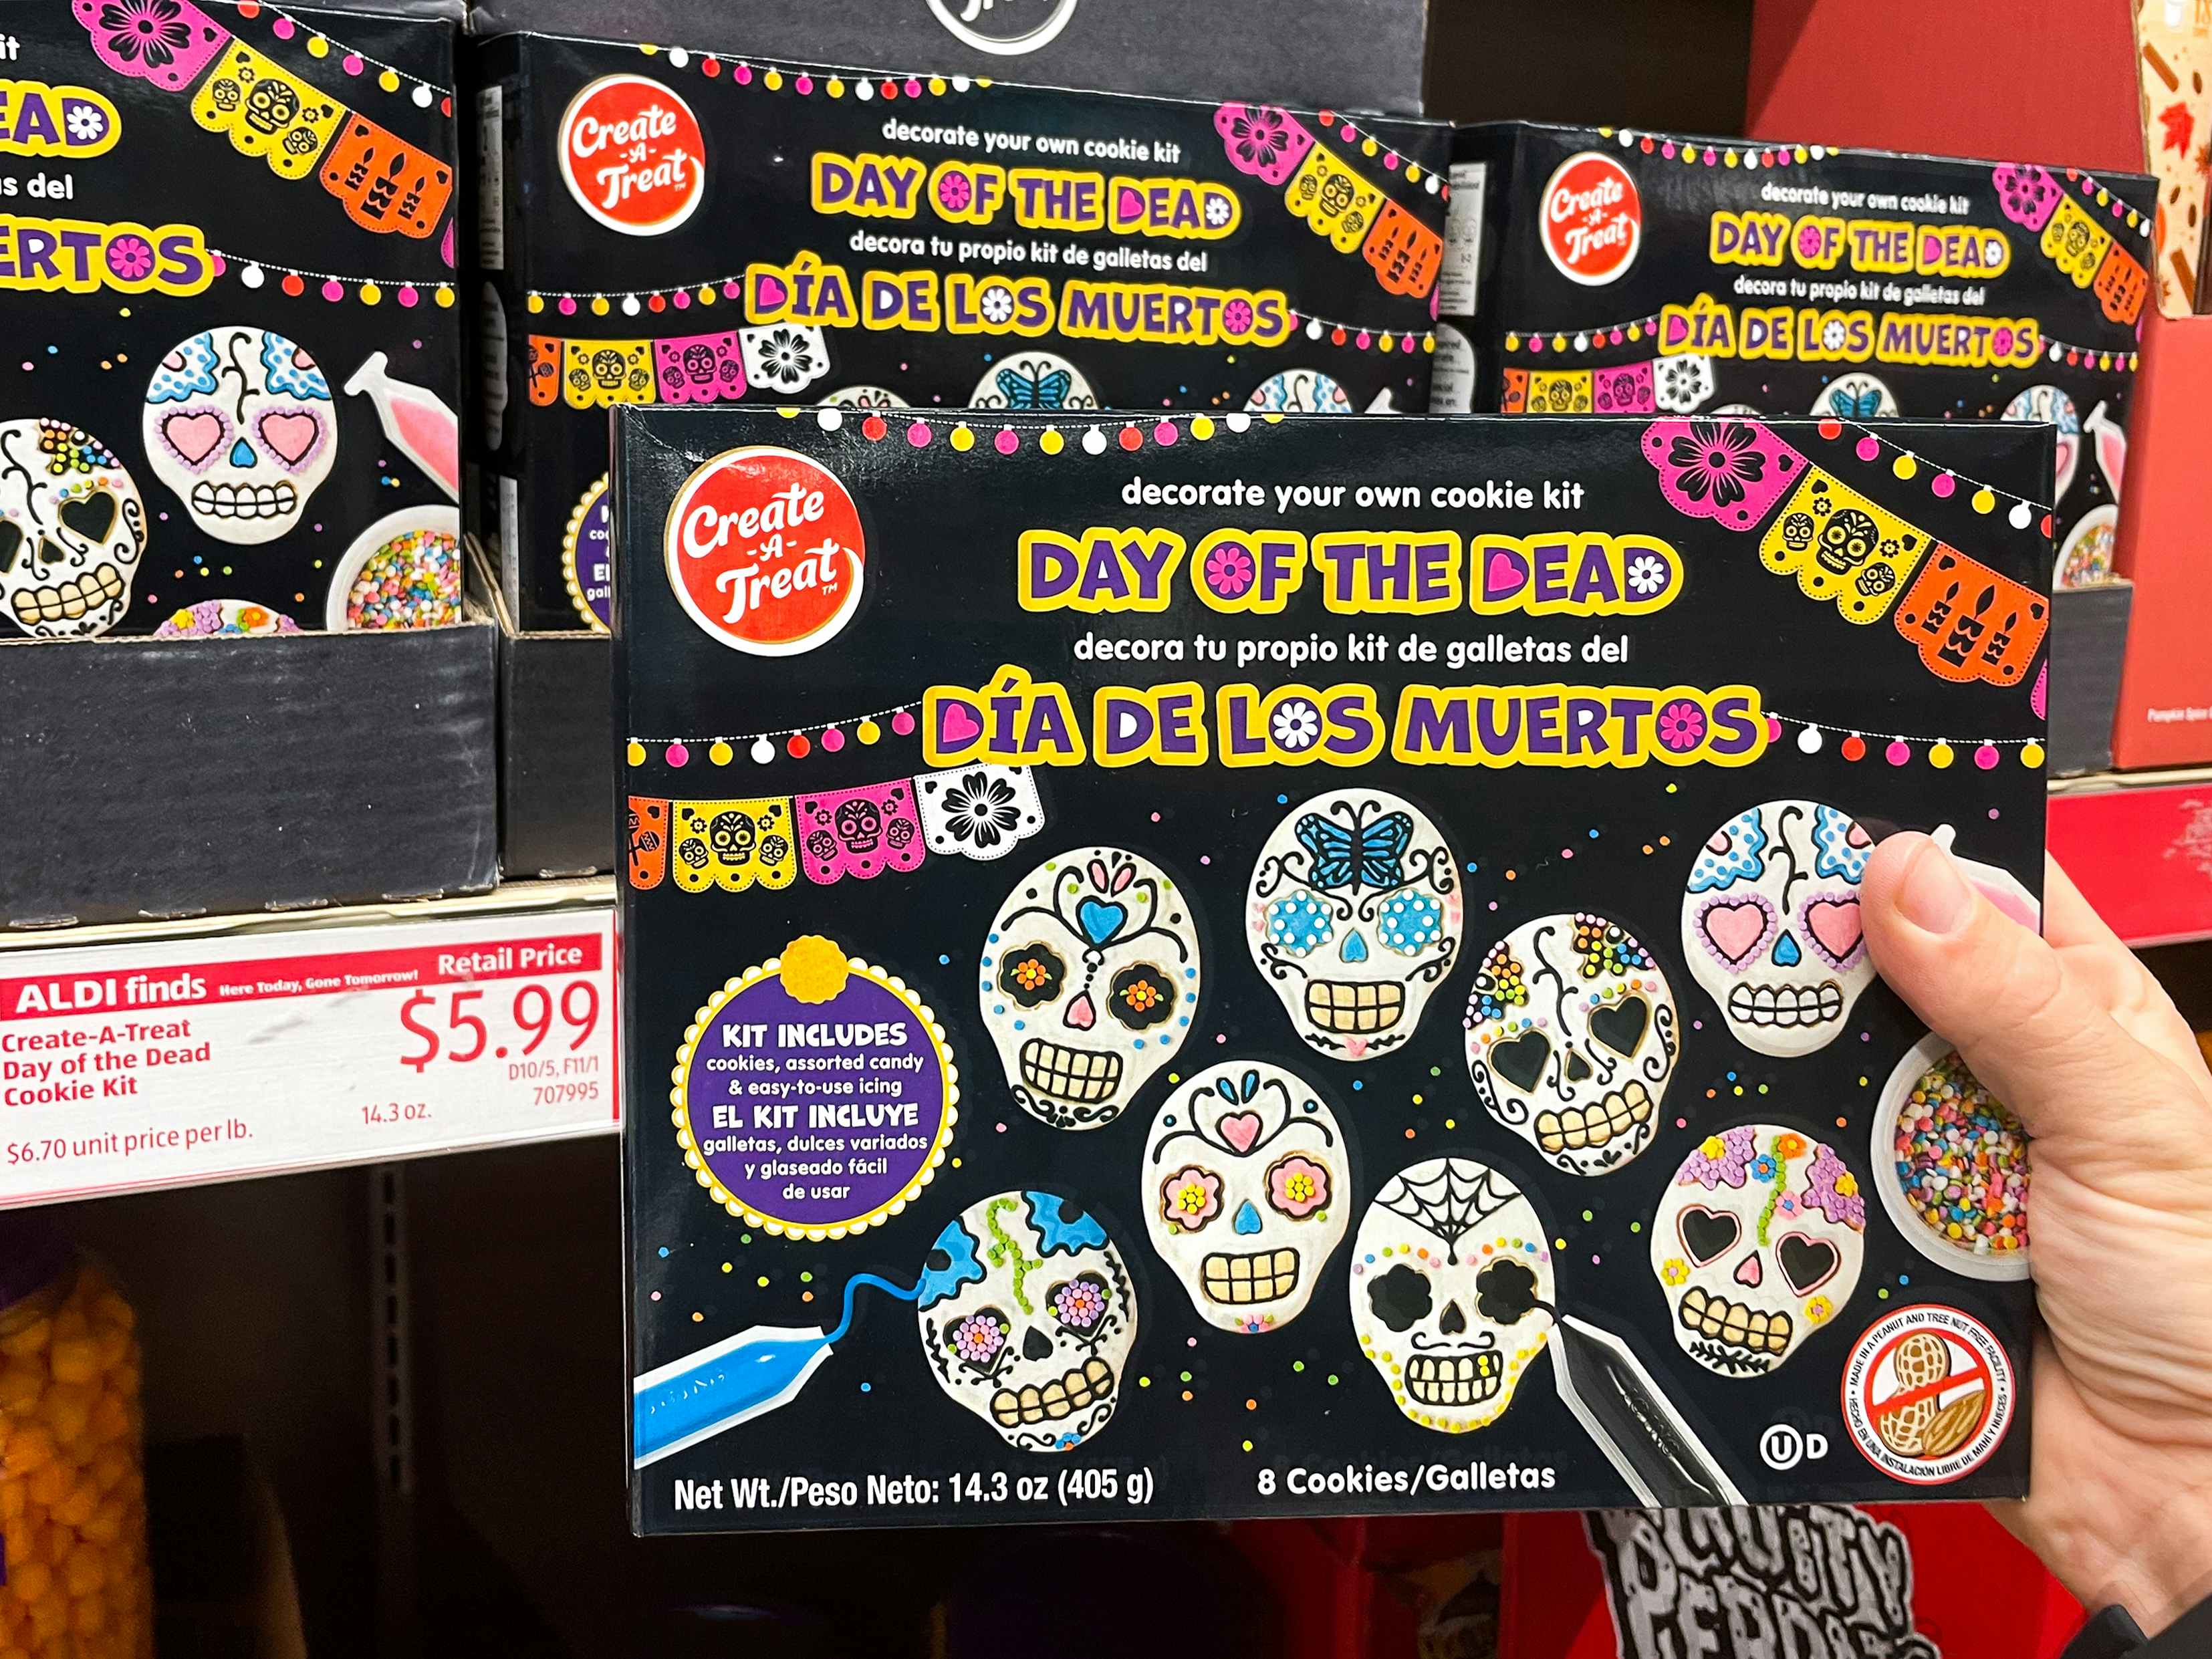 A person's hand holding a Halloween Day of the Dead cookie decorating kit in Aldi.